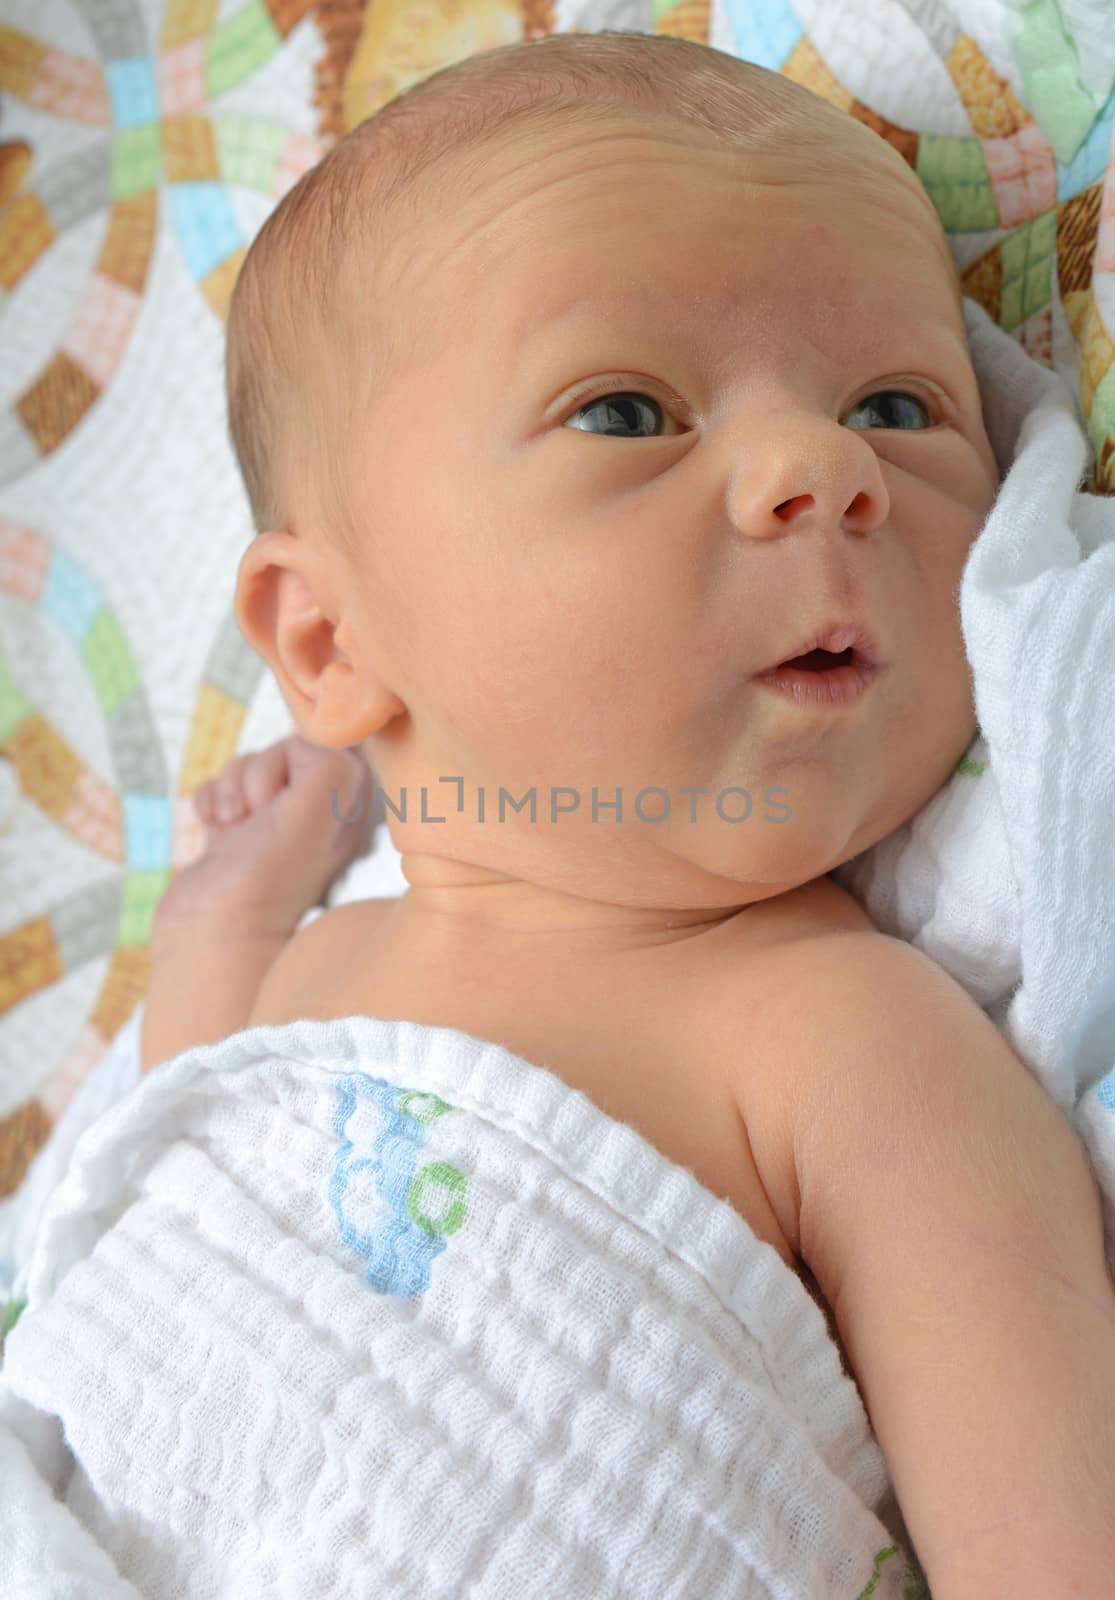 newborn with an expression of wonder and surprise